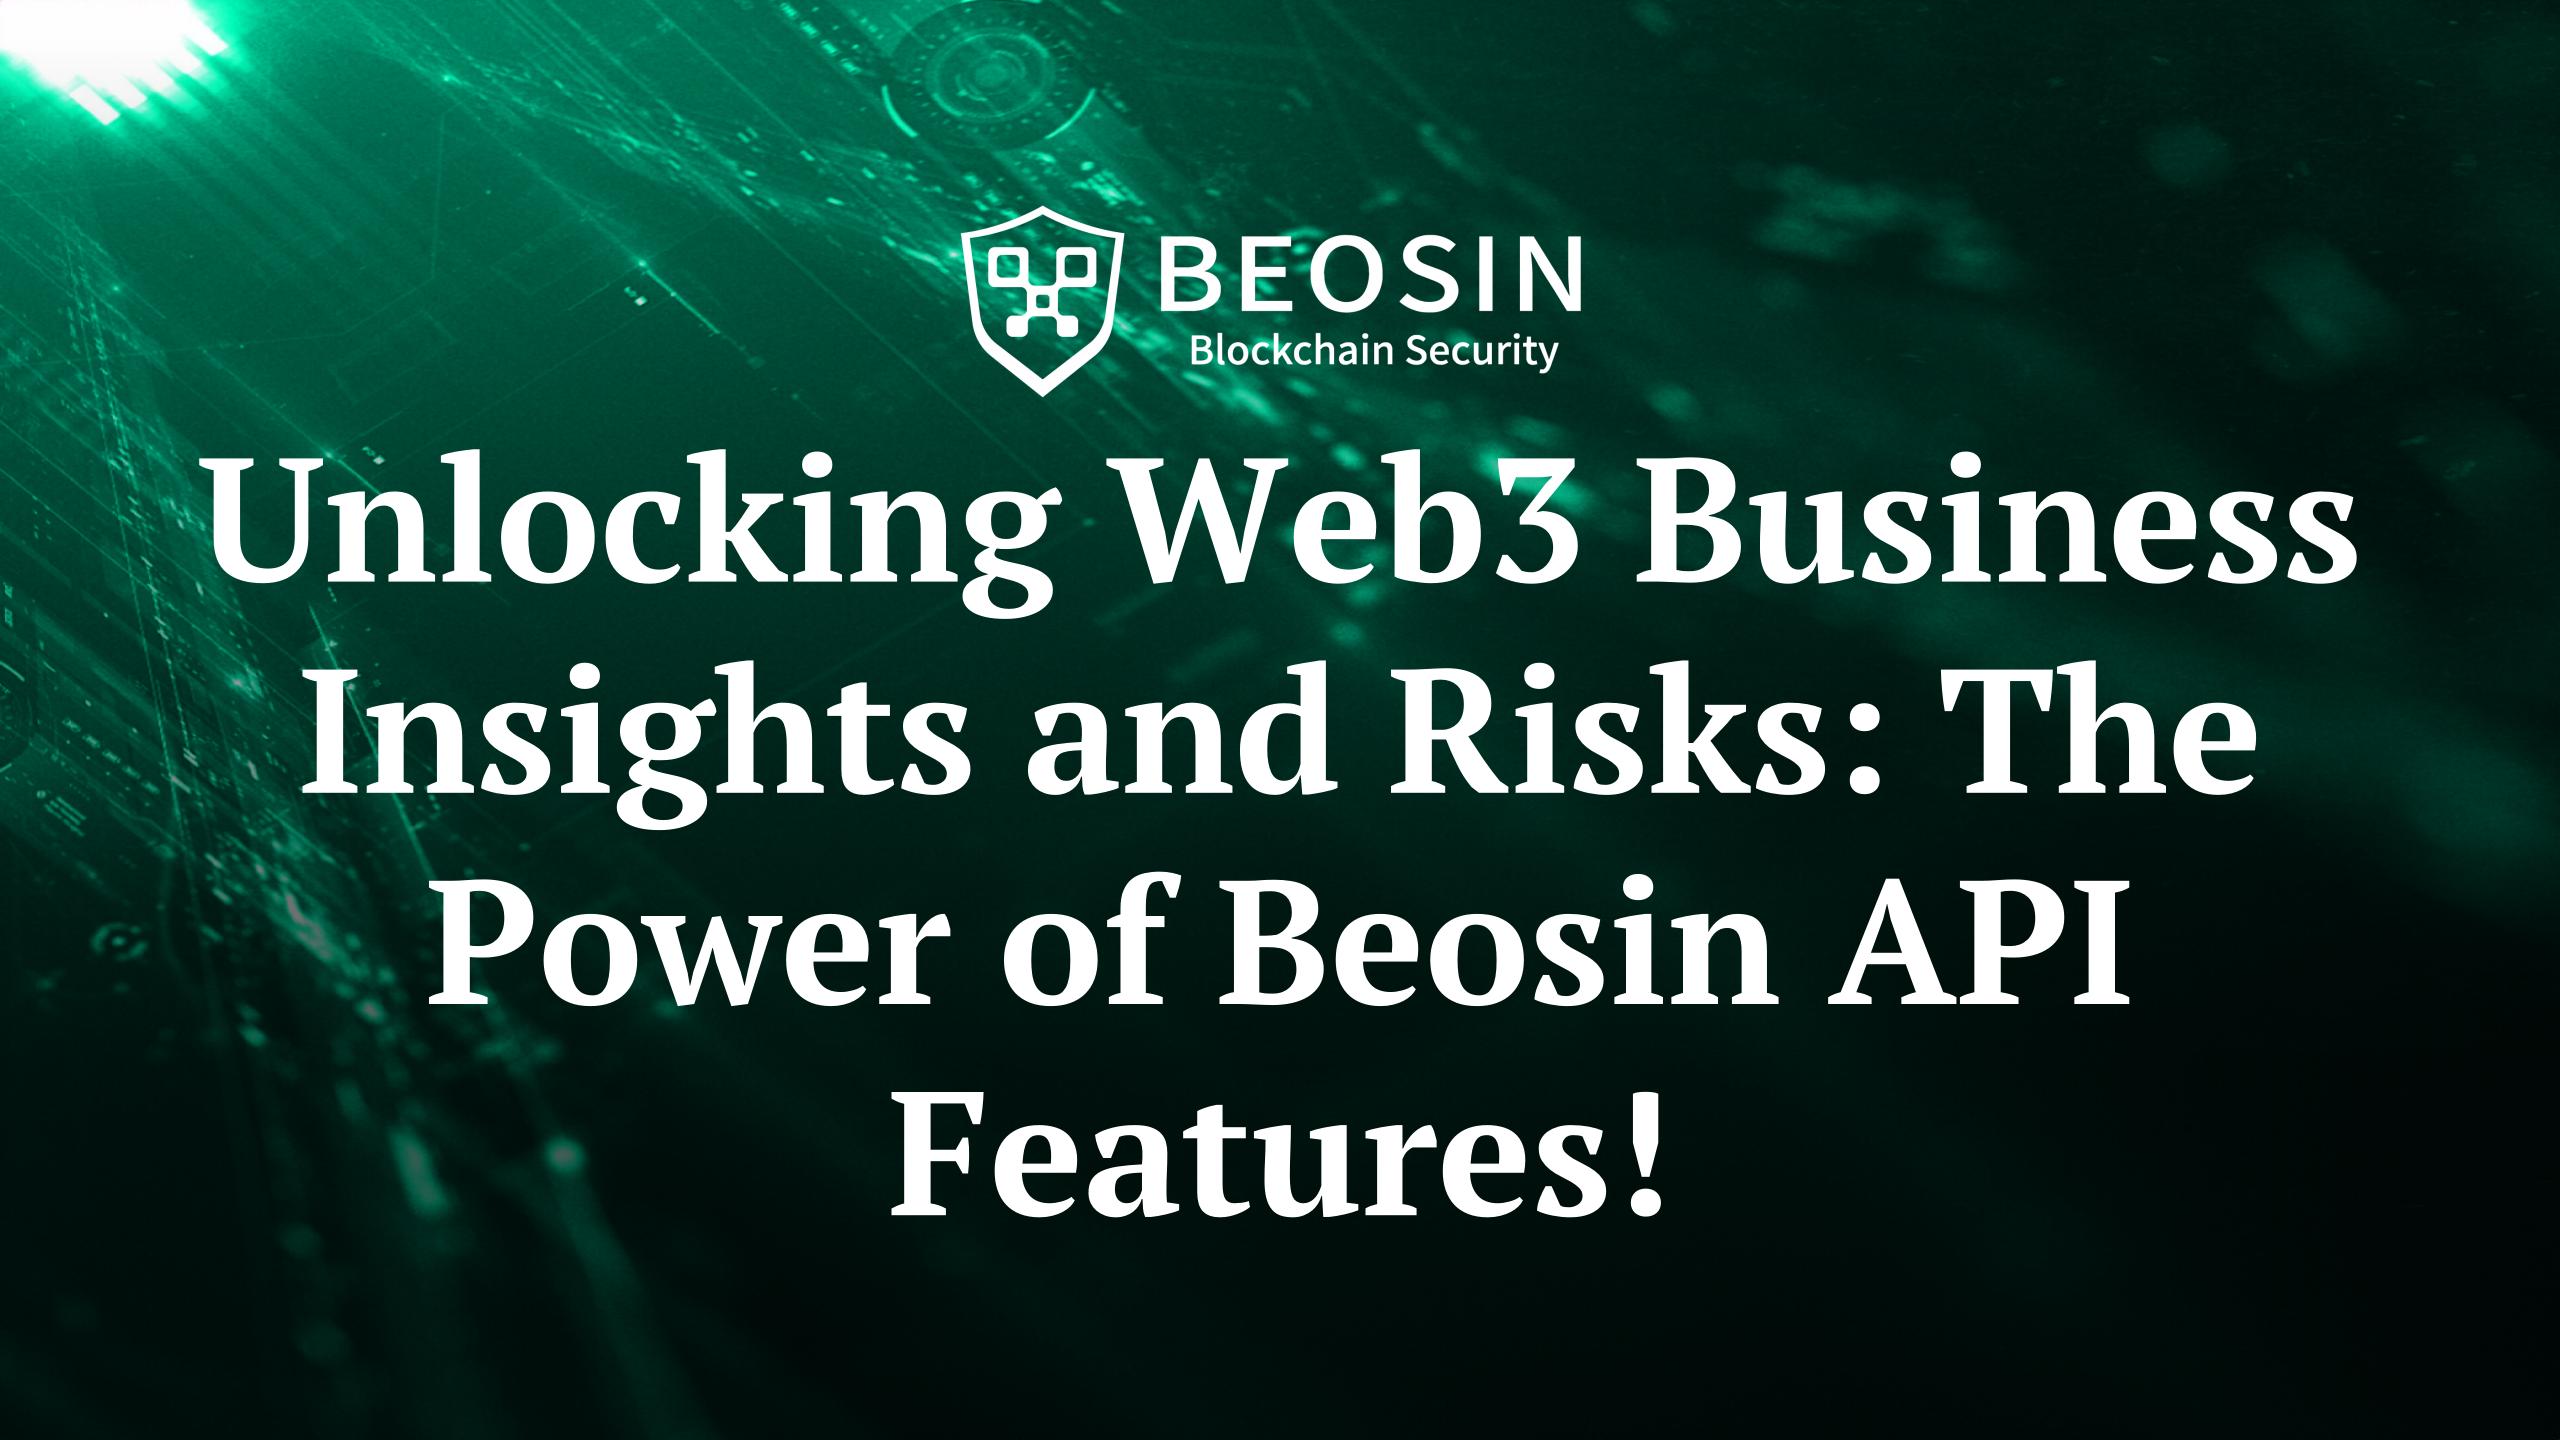 Unlocking Web3 Business Insights and Risks: The Power of Beosin API Features!